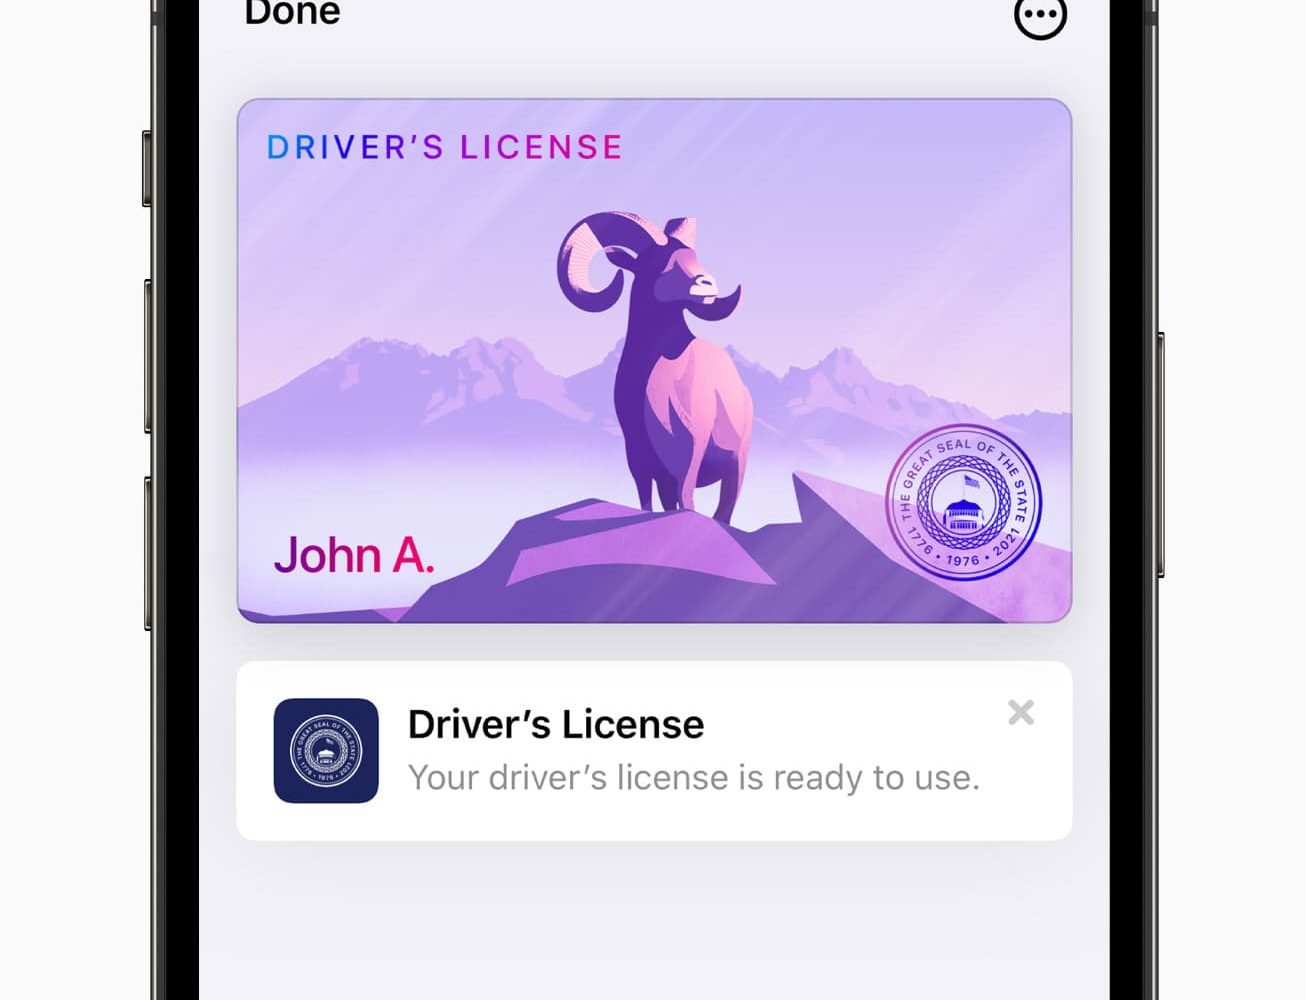 Apple's promotional image for iOS 15 showing an iPhone with a user's state-issued ID in the Wallet app